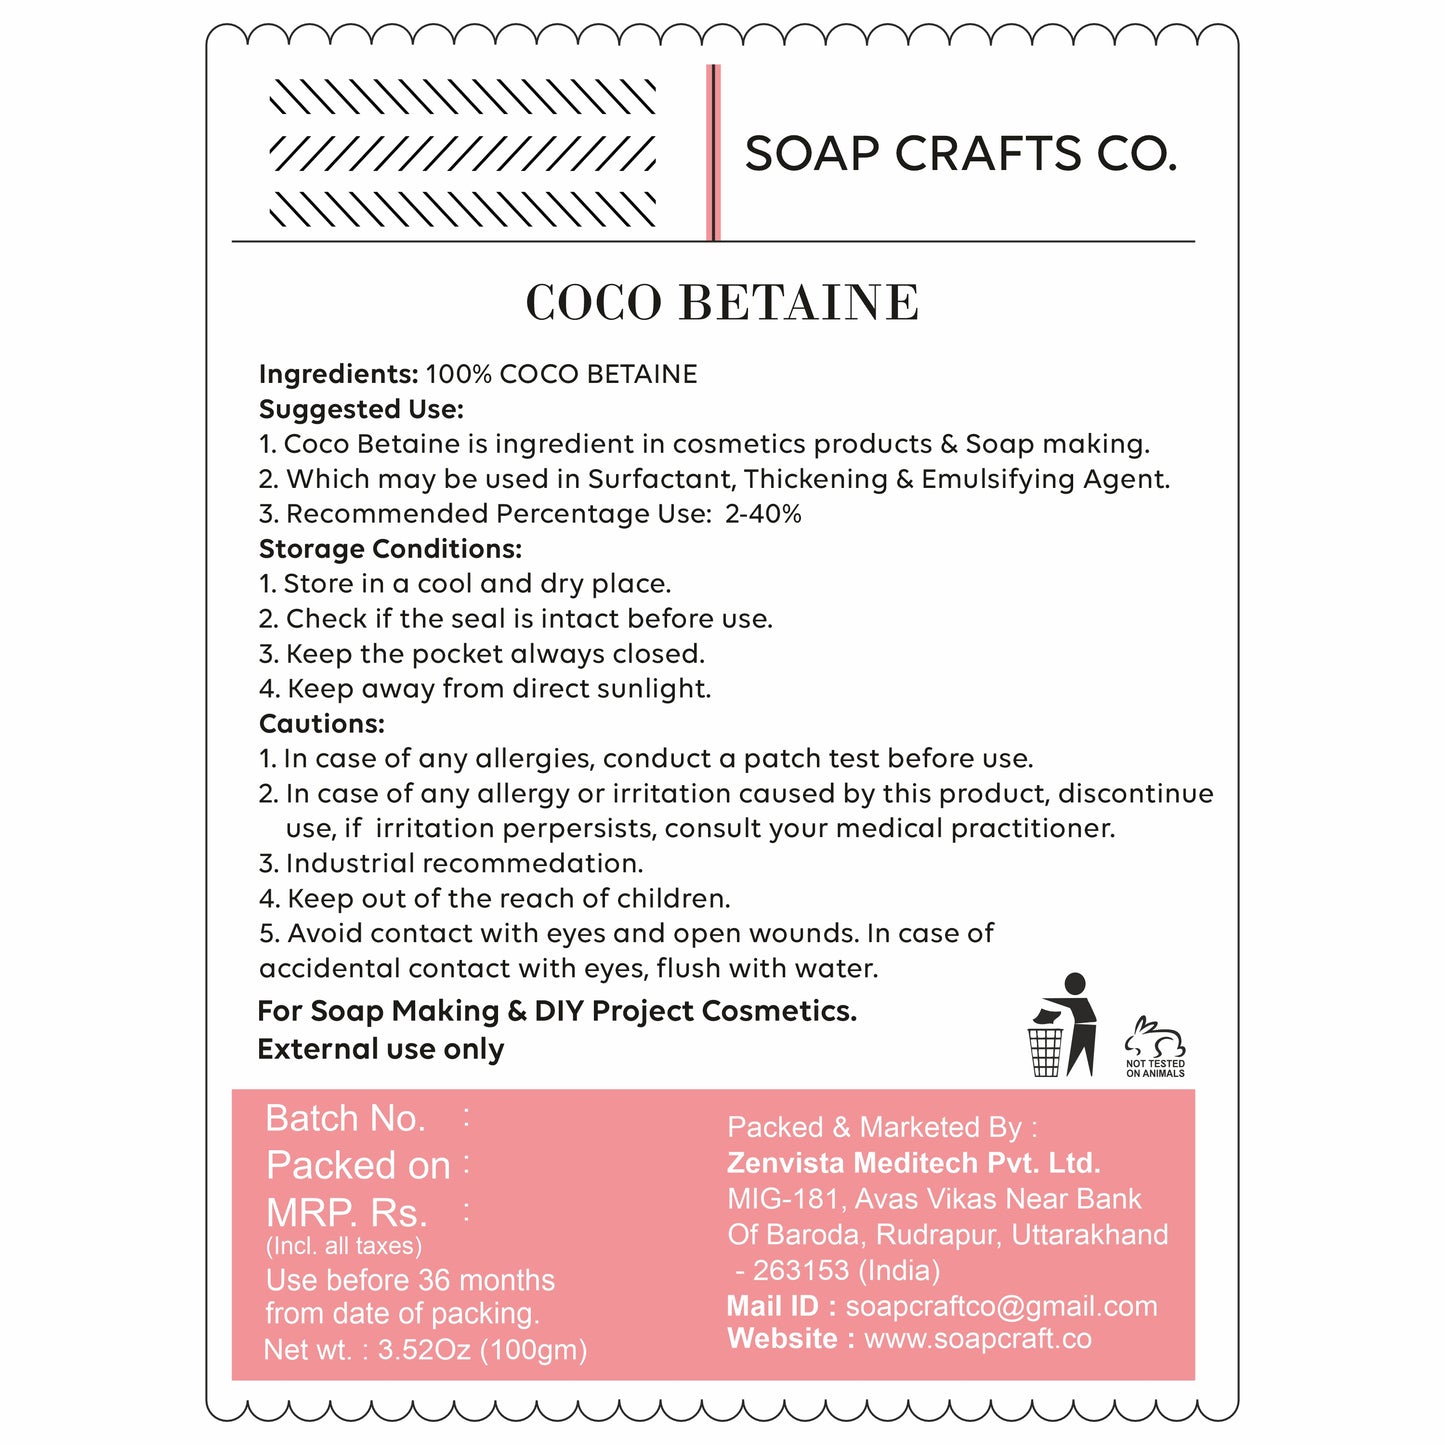 cosmeticmaking, saopmaking, cosmeticmakingingredients, soapmakingingredients,cosmeticingredients,naturalingredients,organicingredients,veganingredients, essentialoils,fragranceoils,carrieroils, carrieroils, butters, clays,botanicals,herbs,preservatives,emulsifiers,surfa ctants,thickeners, thickeners,exfoliants, coco betain